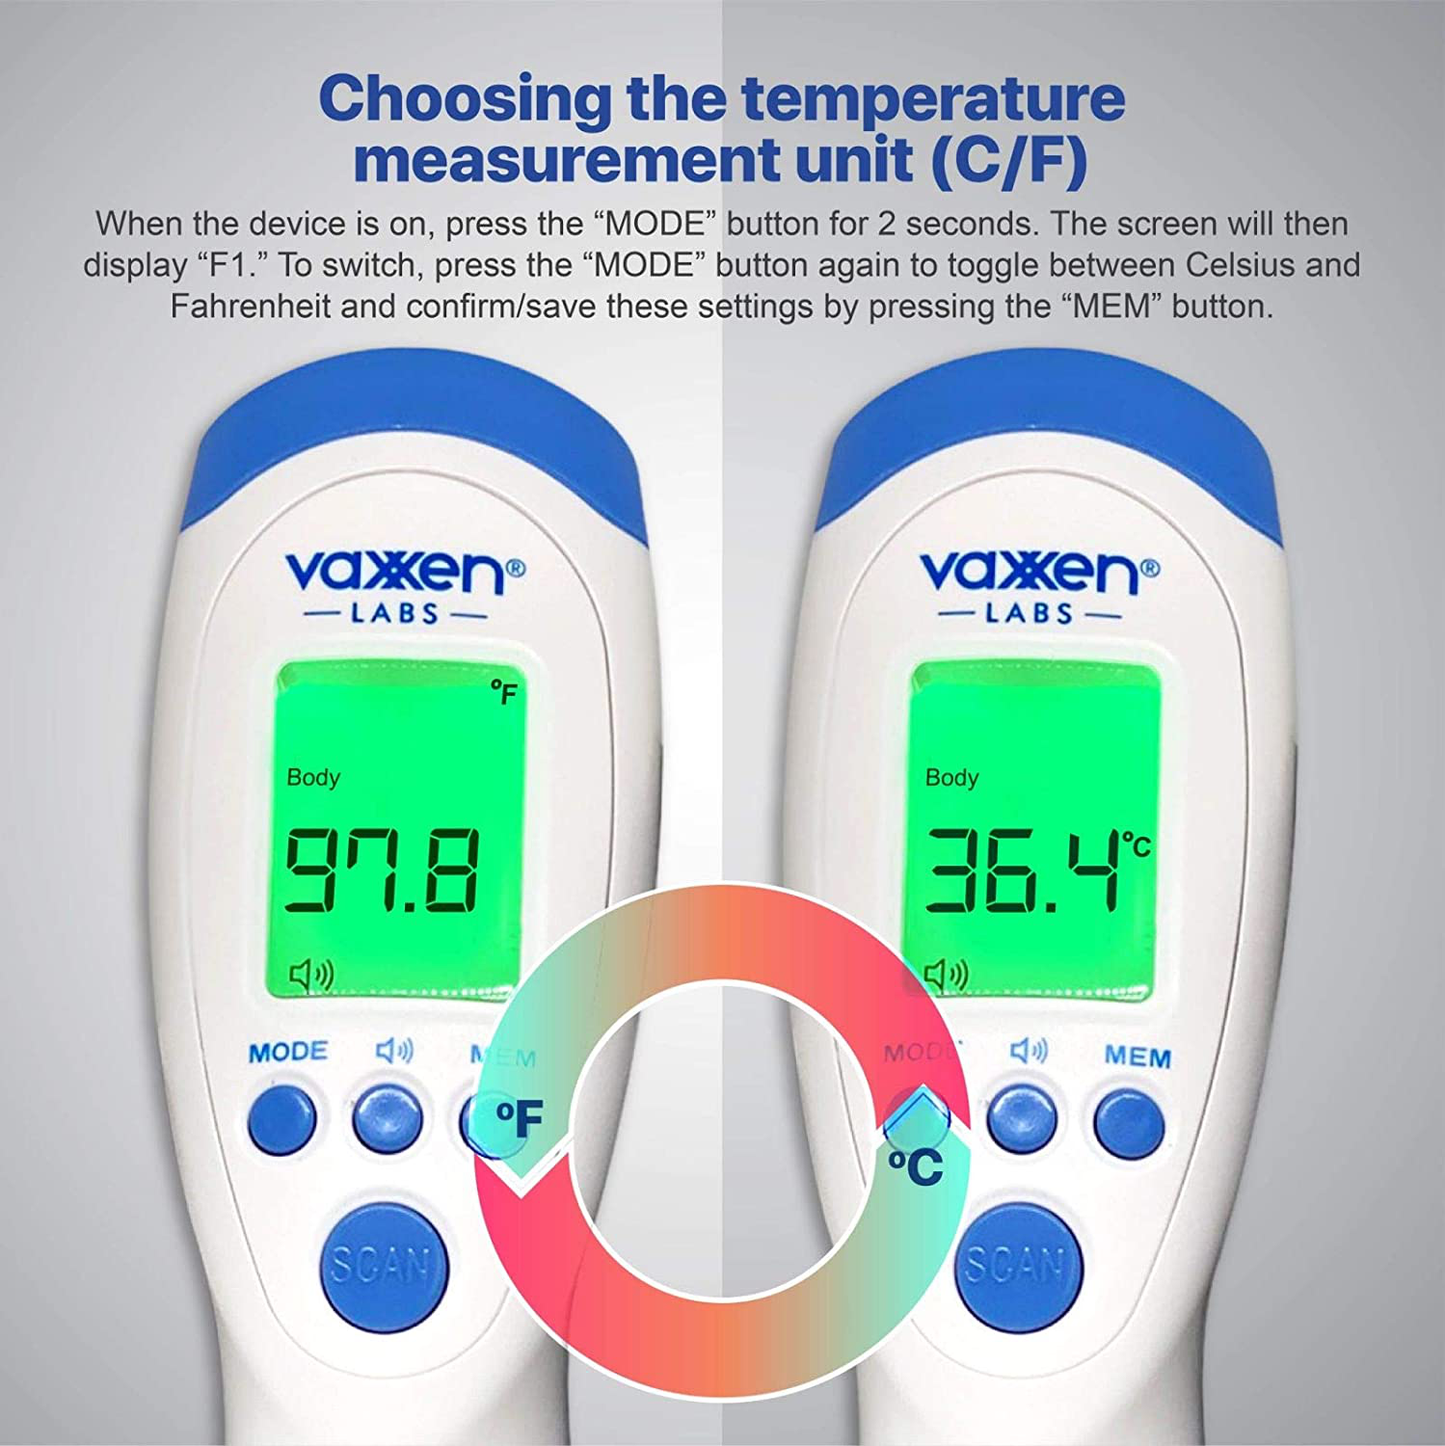 No Touch Infrared Forehead Thermometer for Adults, Kids, Baby with 1 Second Readings with Auto Power off 